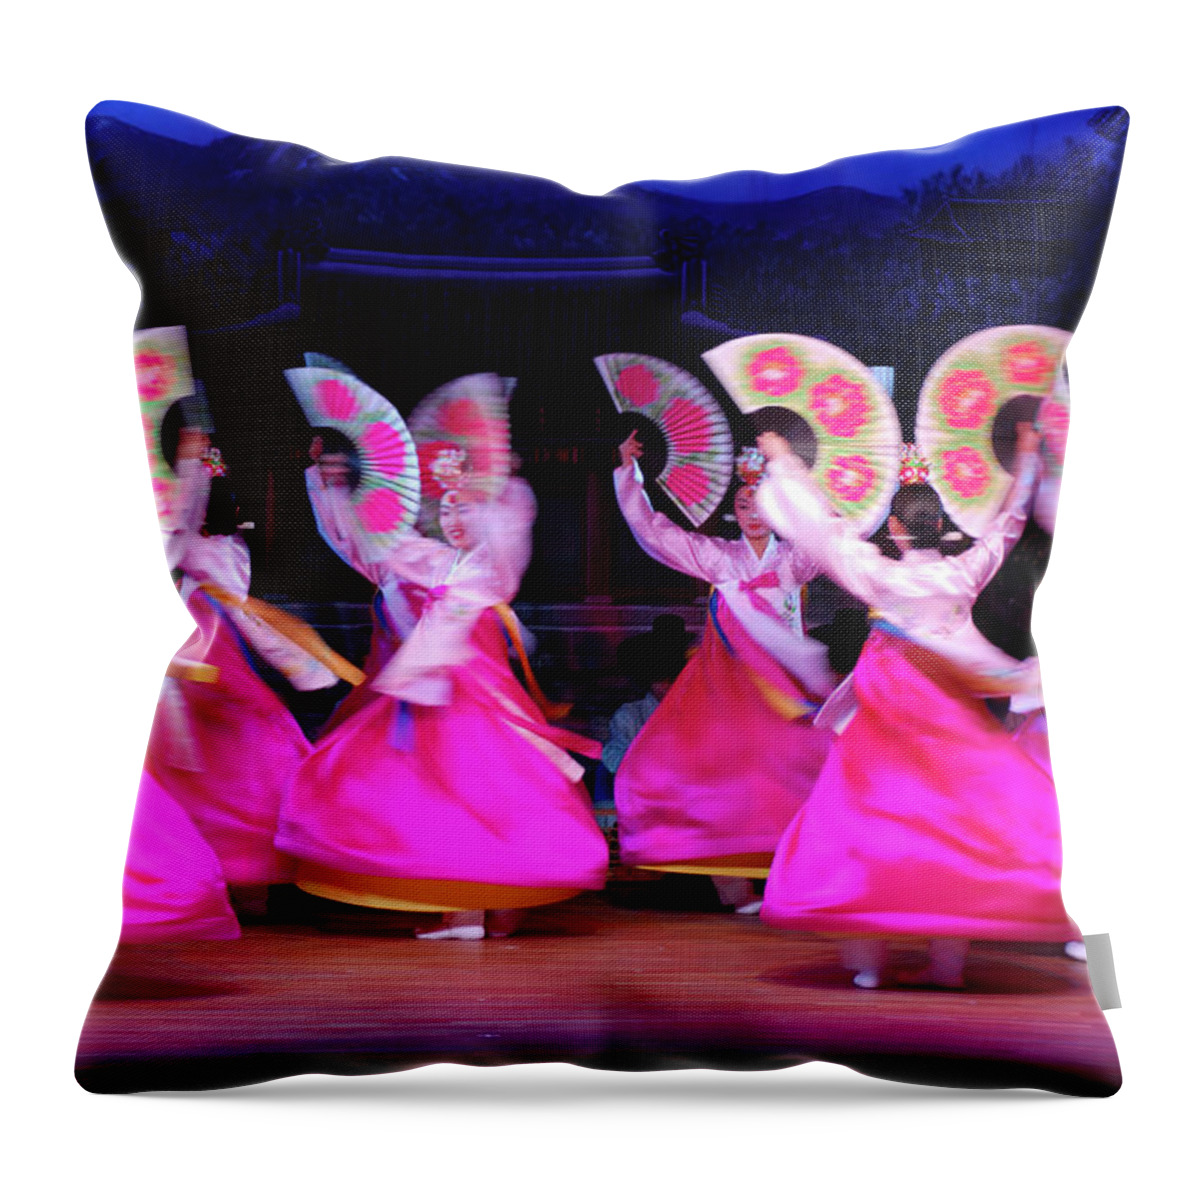 Korea Throw Pillow featuring the photograph Dancers Performing At Korea House by Lonely Planet